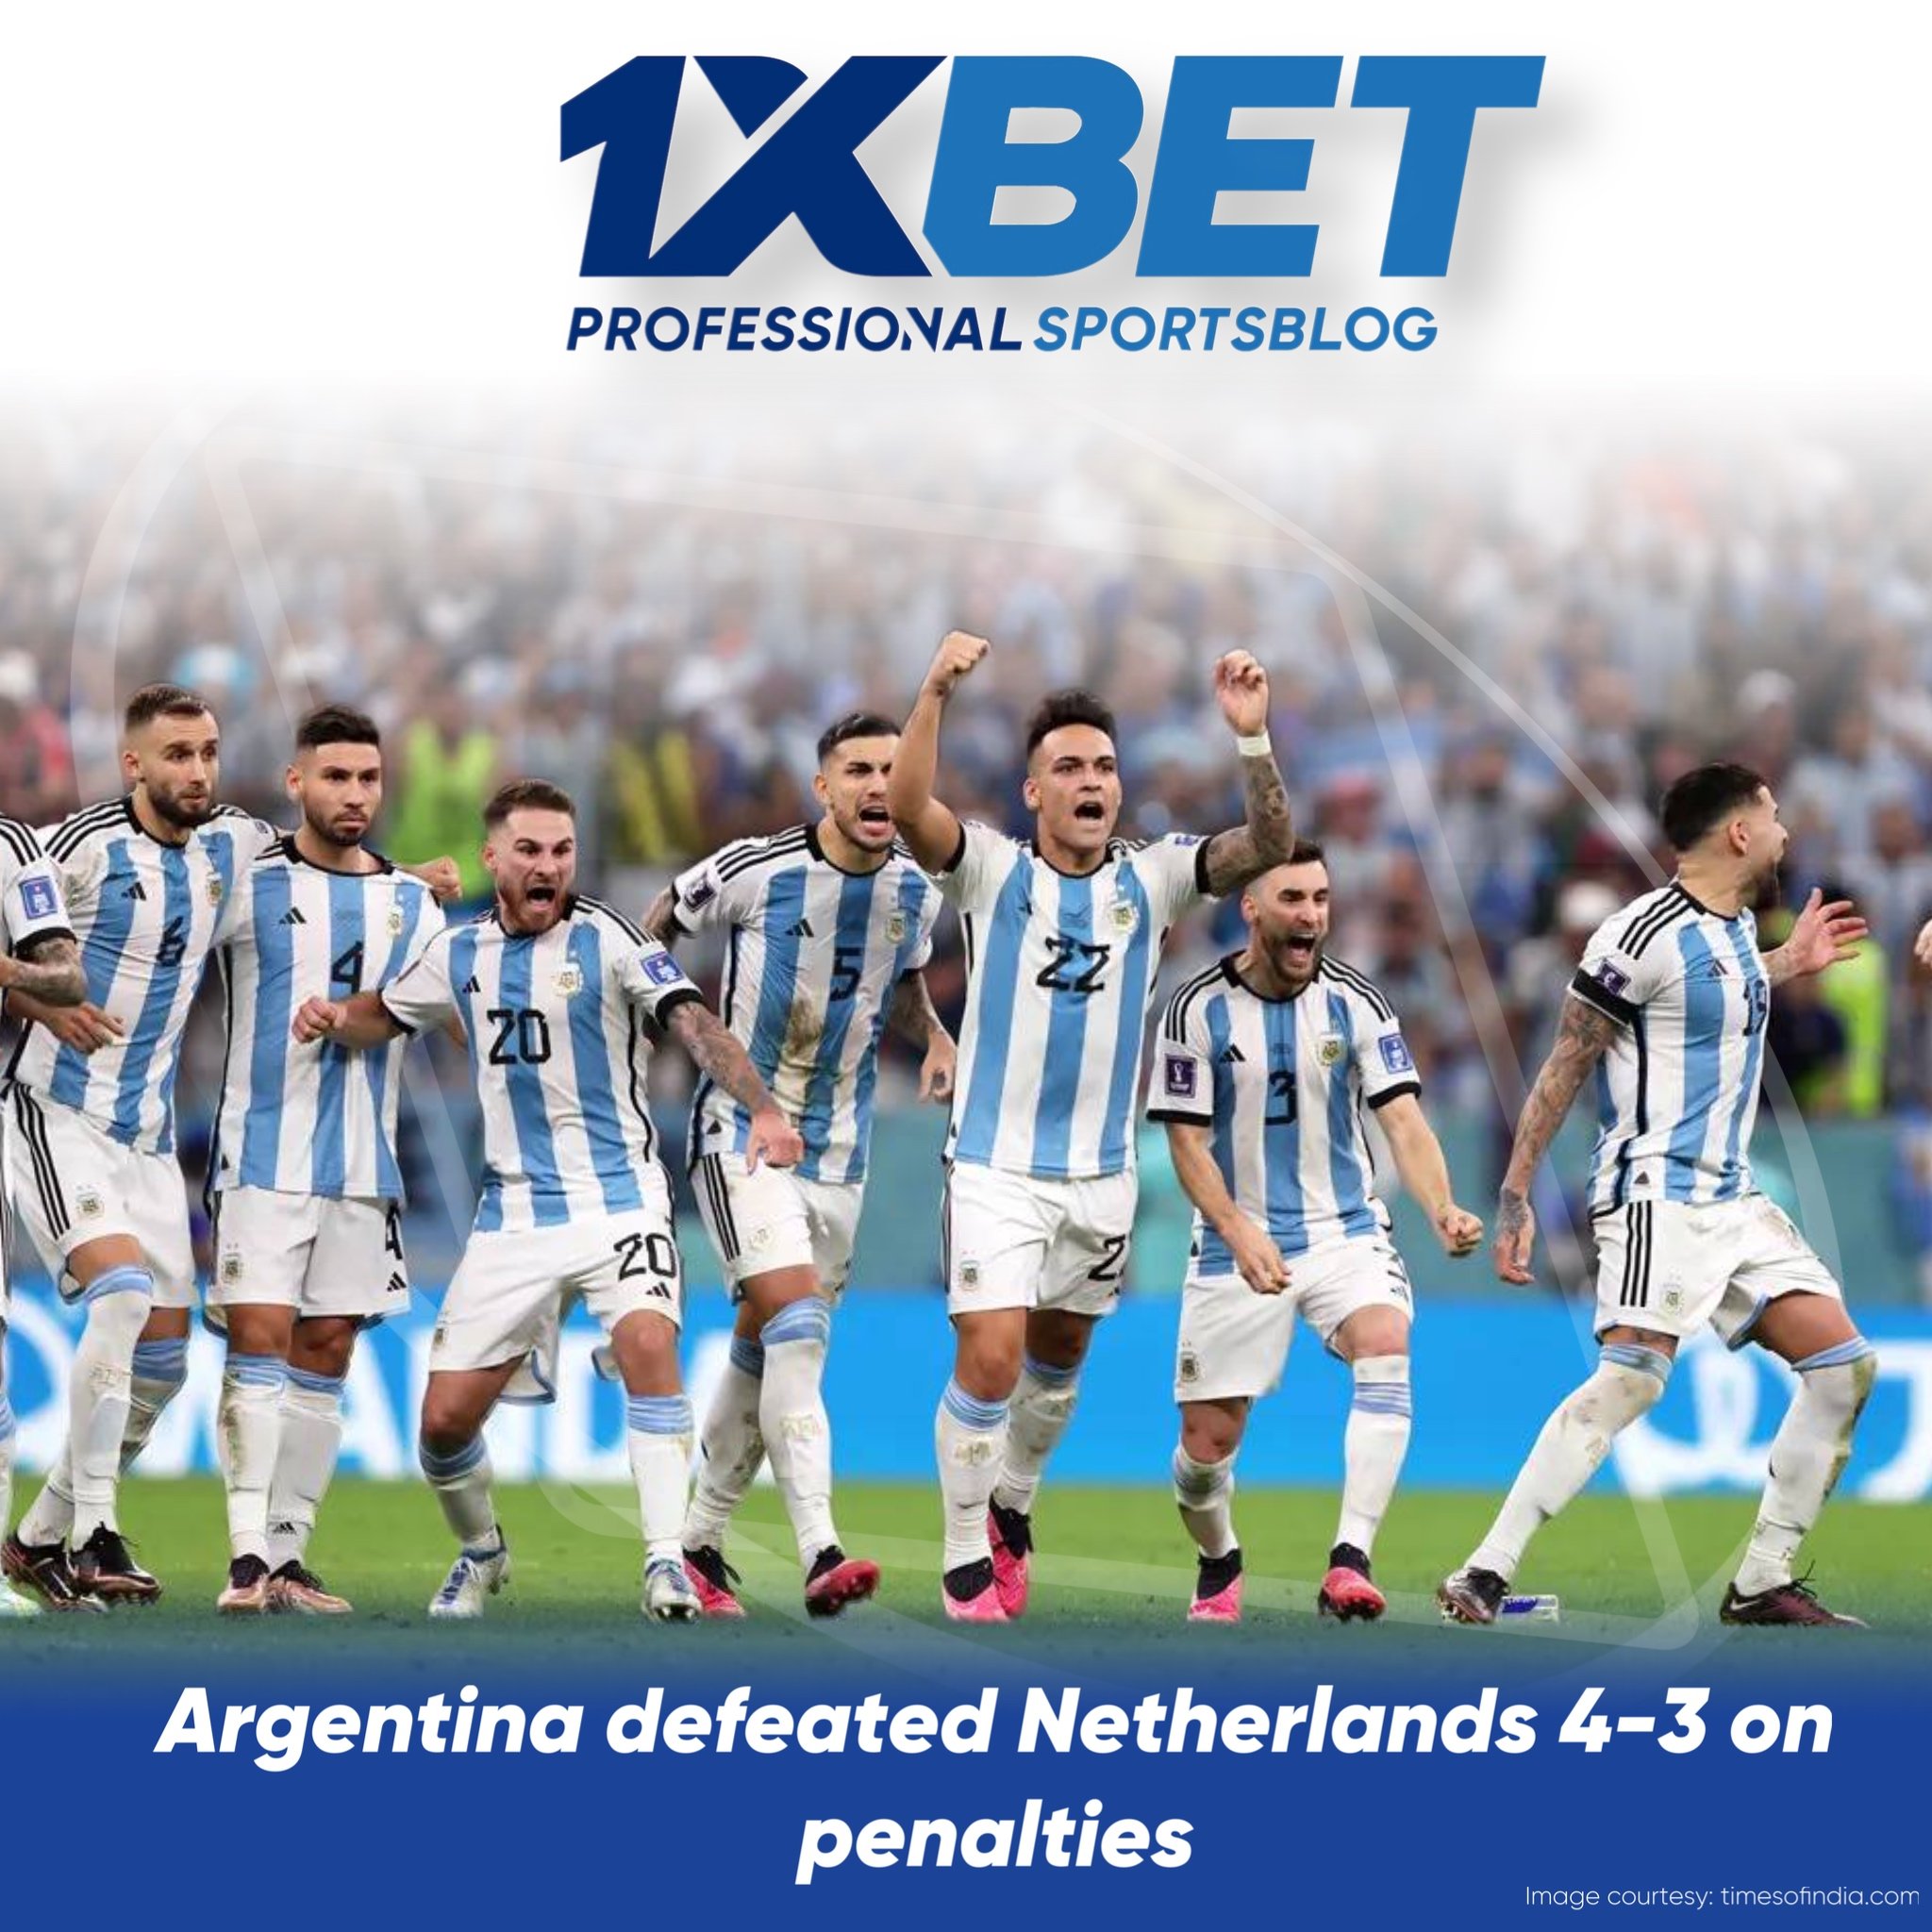 Argentina defeated Netherlands 4-3 on penalties